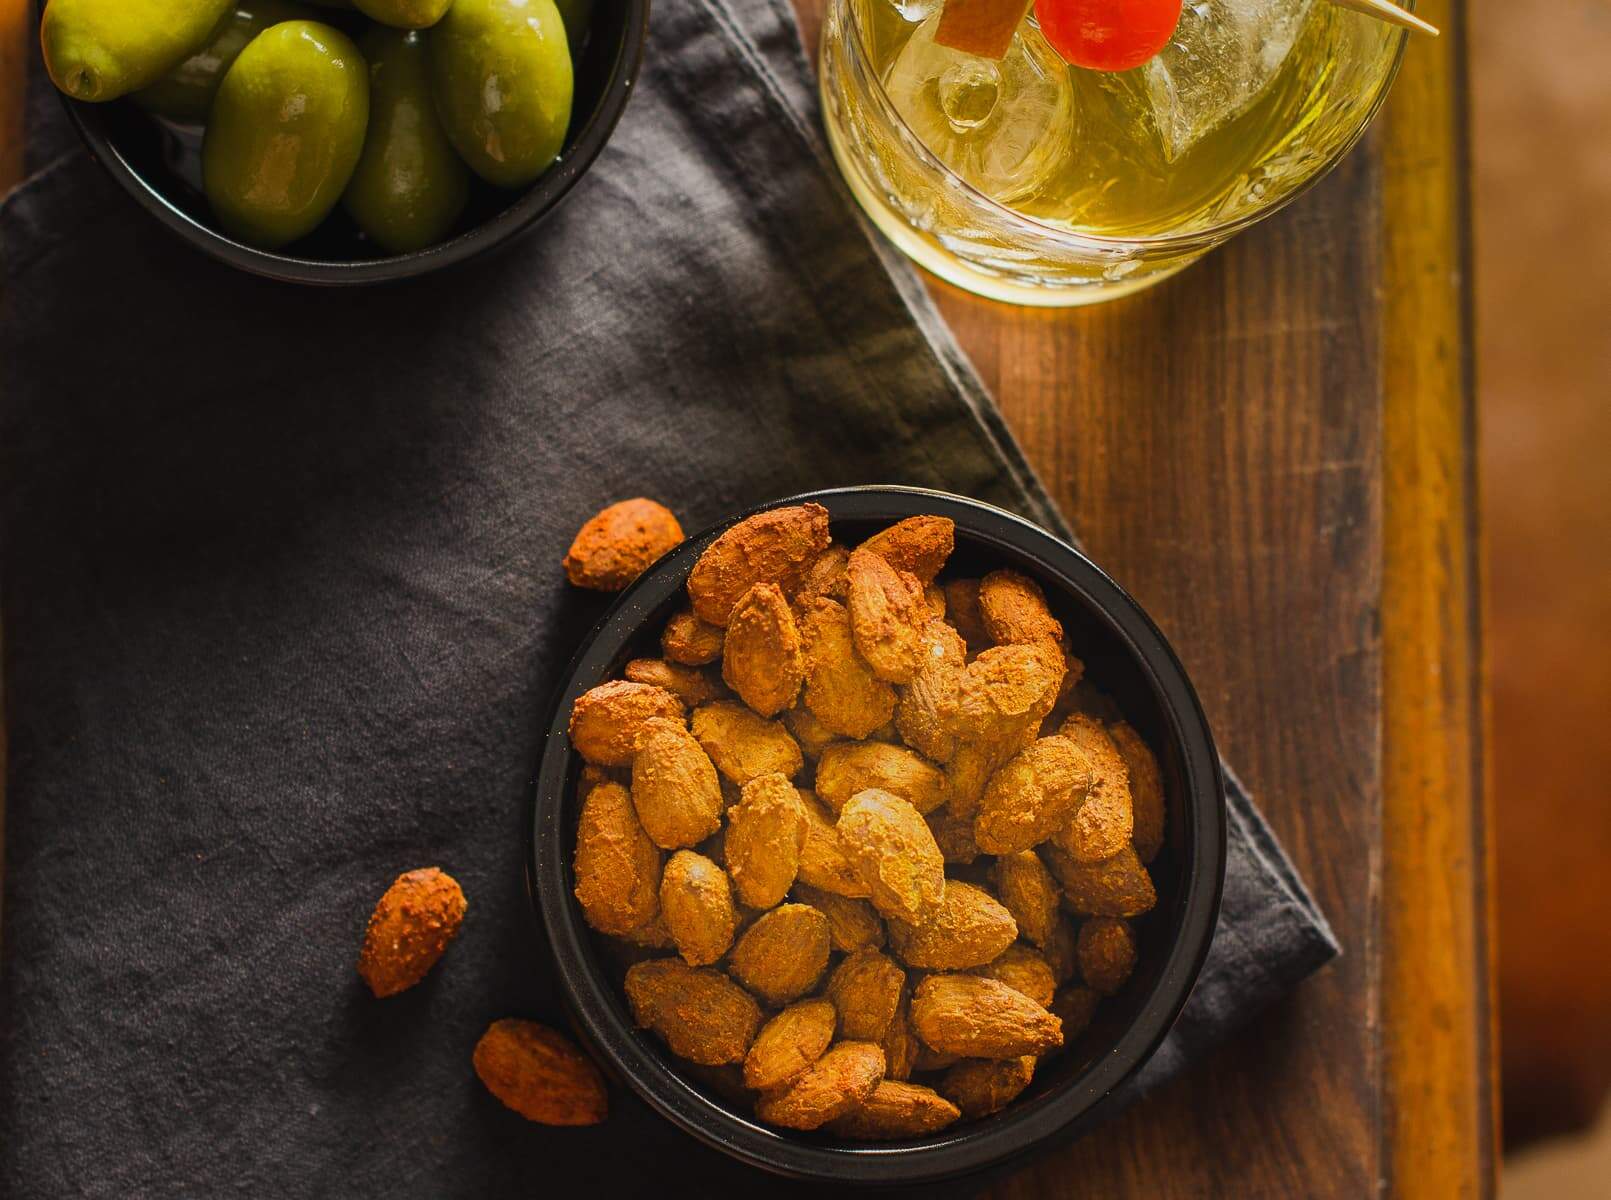 A black tub of spiced nuts served with a whisky cocktail and olives on a mahogany table end.